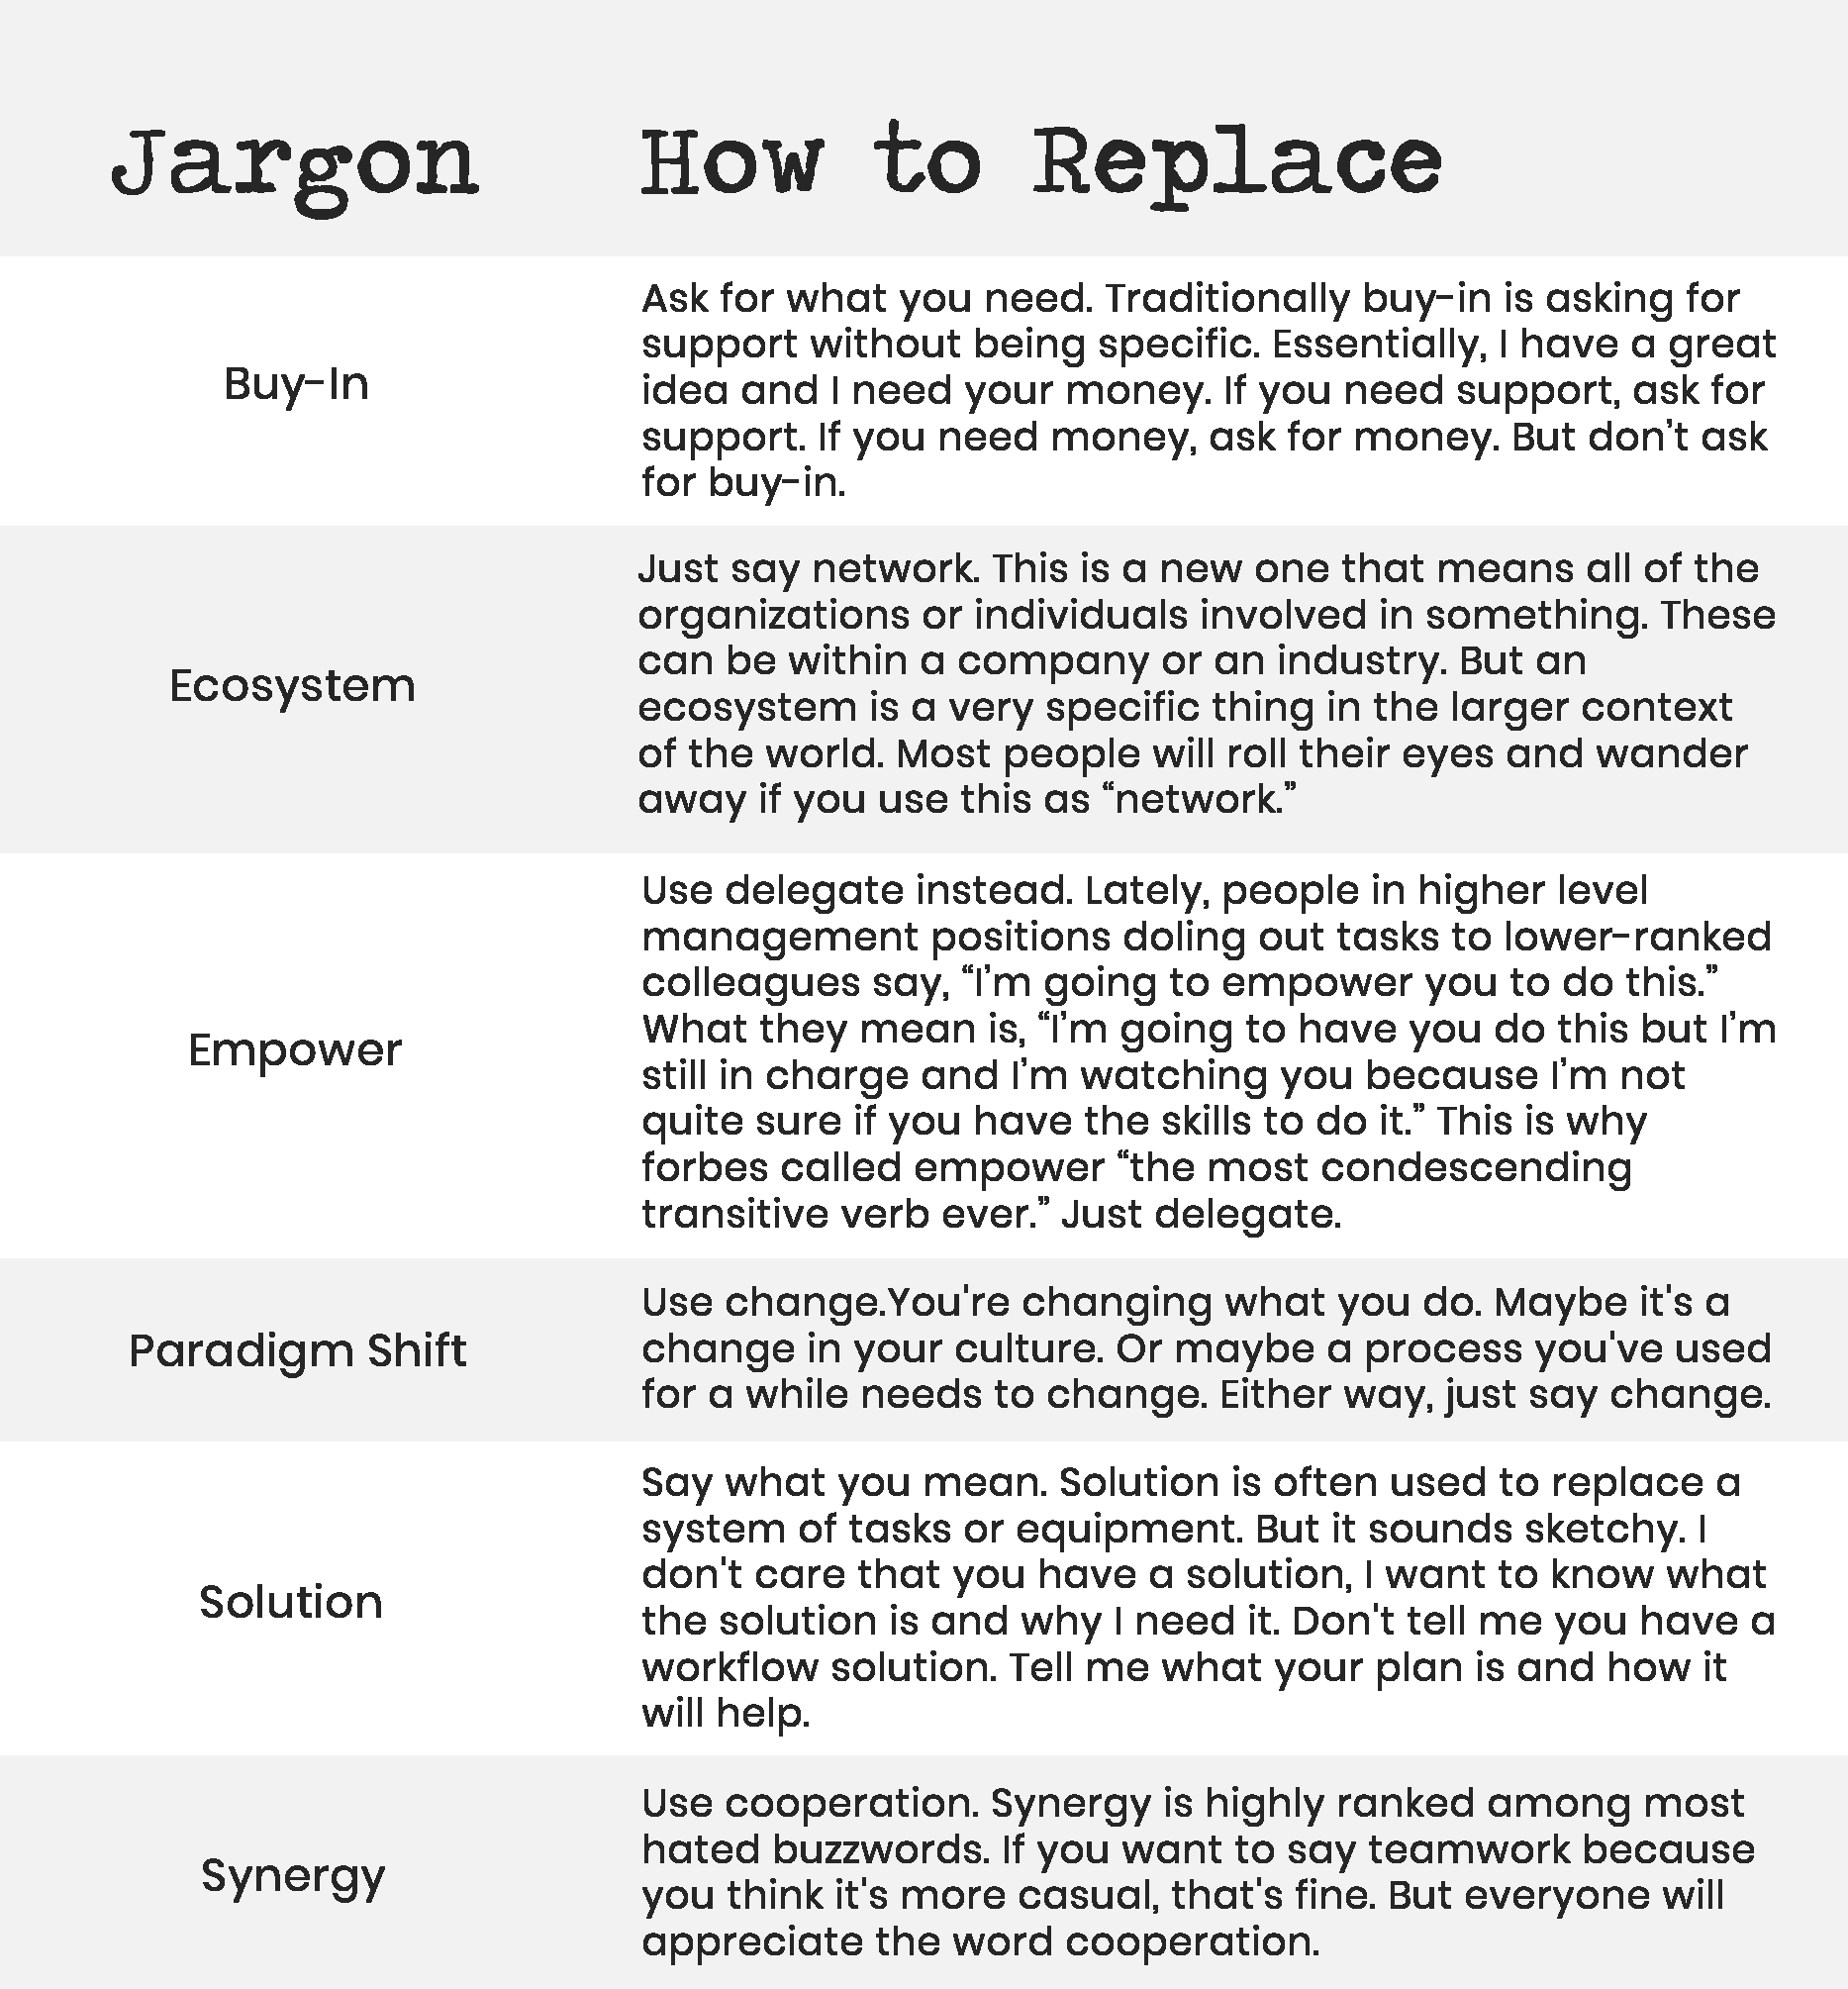 don't use jargon